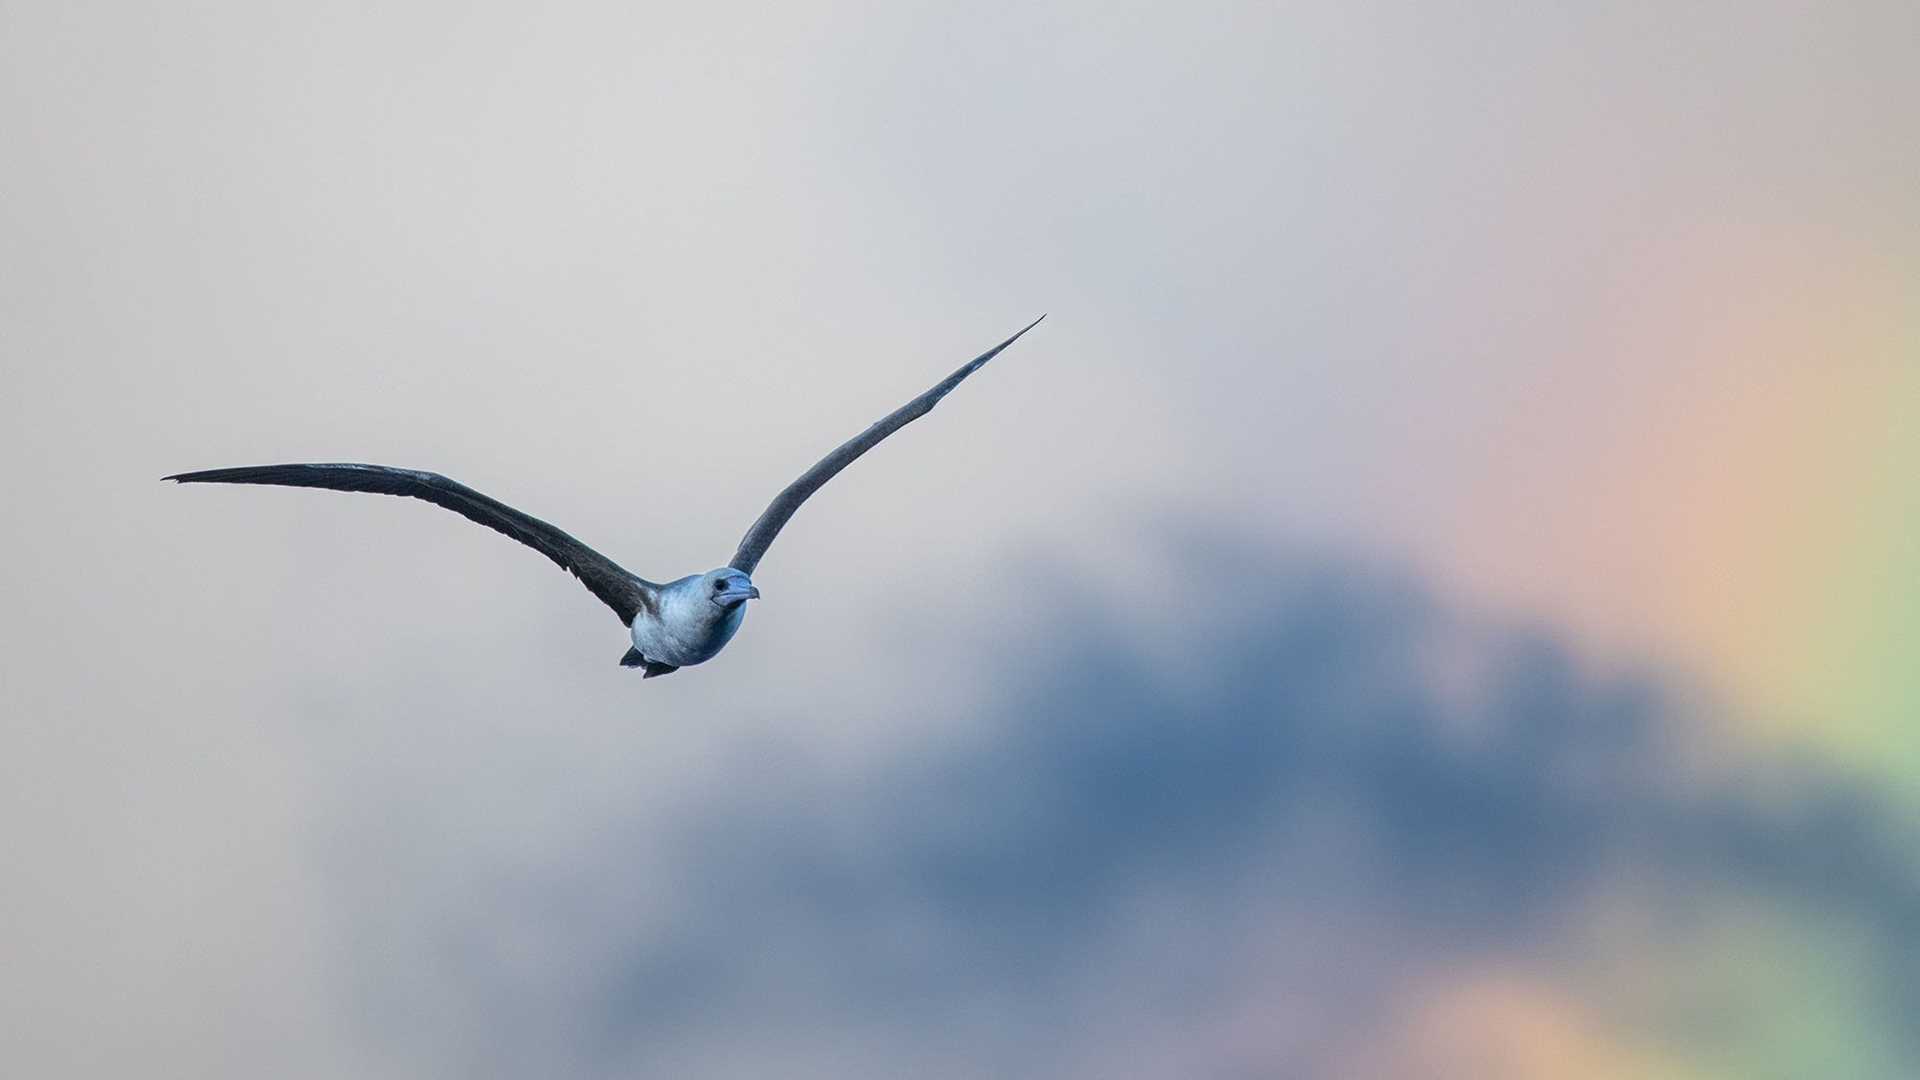 booby in flight against a colorful sky